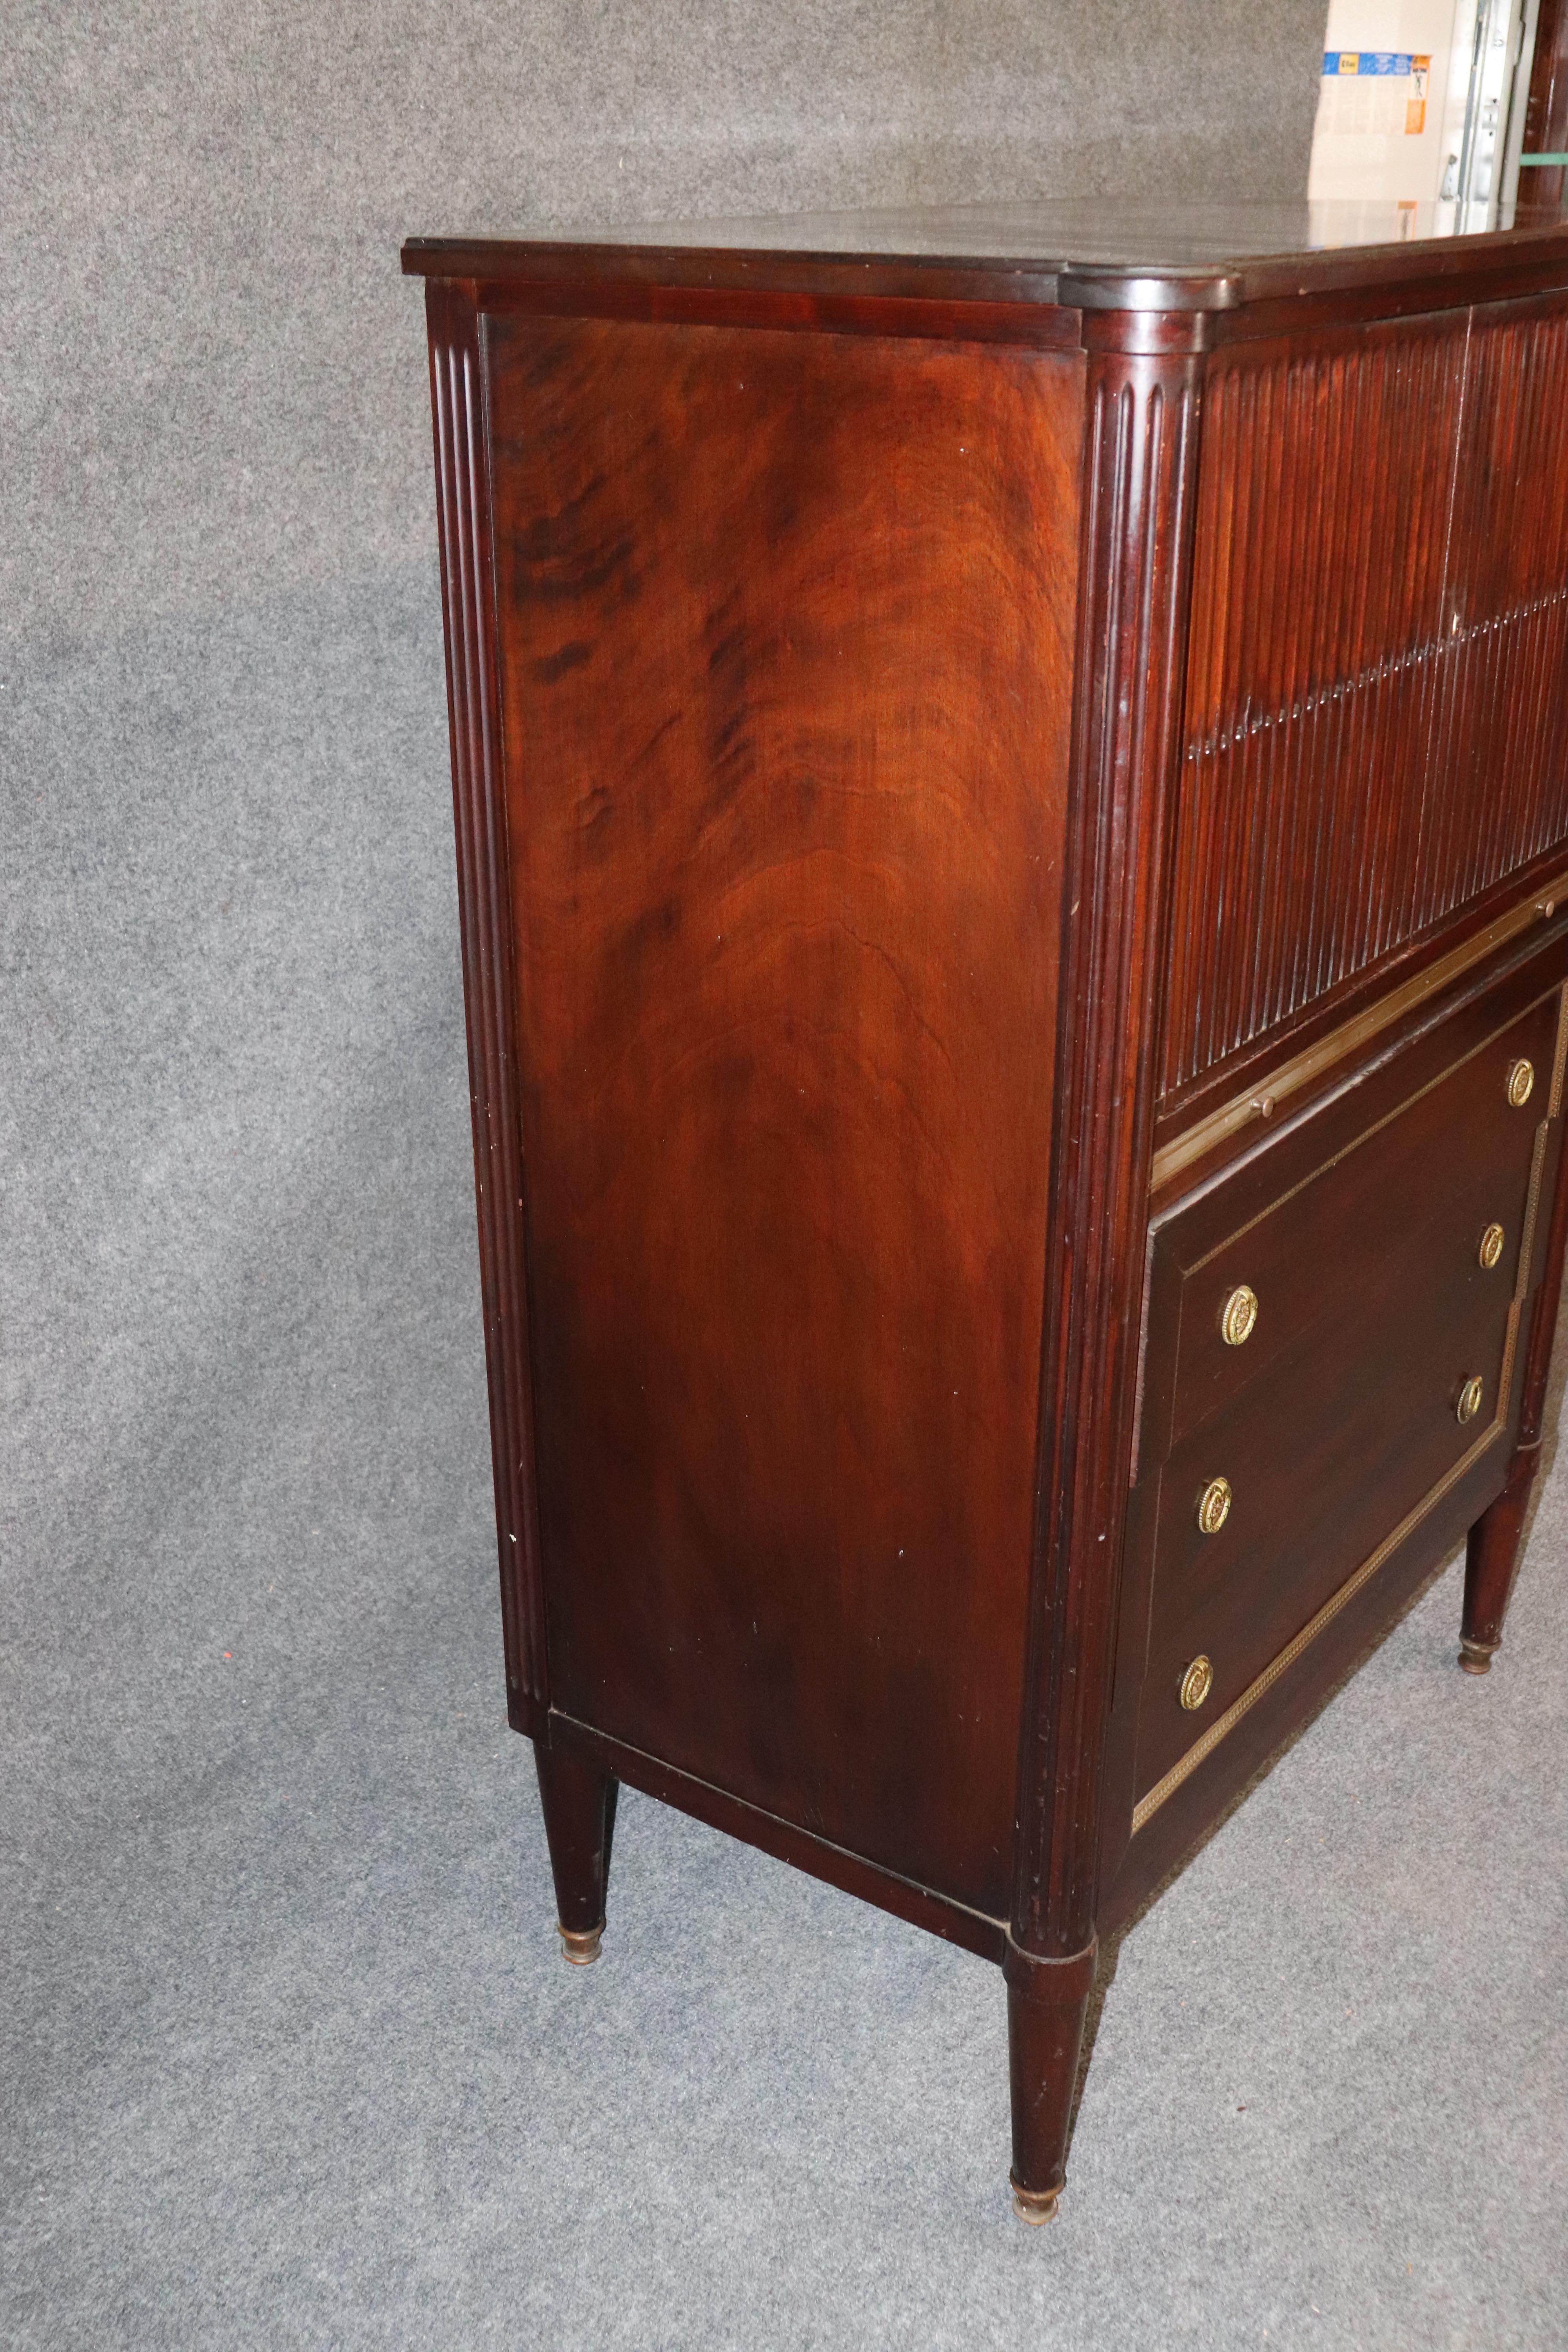 Solid Mahogany French Directoire Style Fitted Chiffarobe Gentleman's Dresser 2